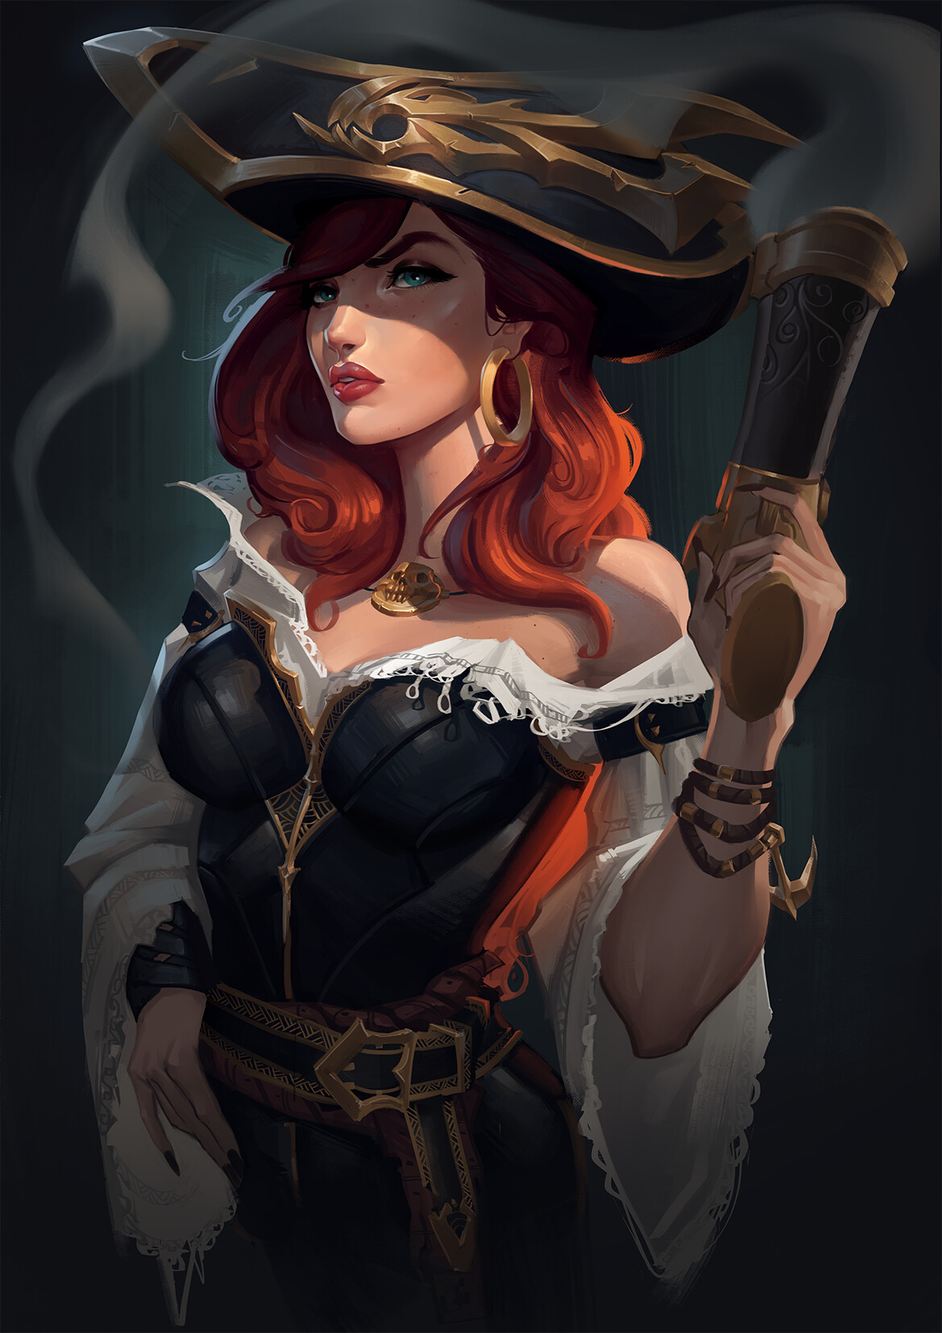 Pirate girl Miss Fortune: Moba game character: League of Legends (Artist: Damon Greenhalgh)